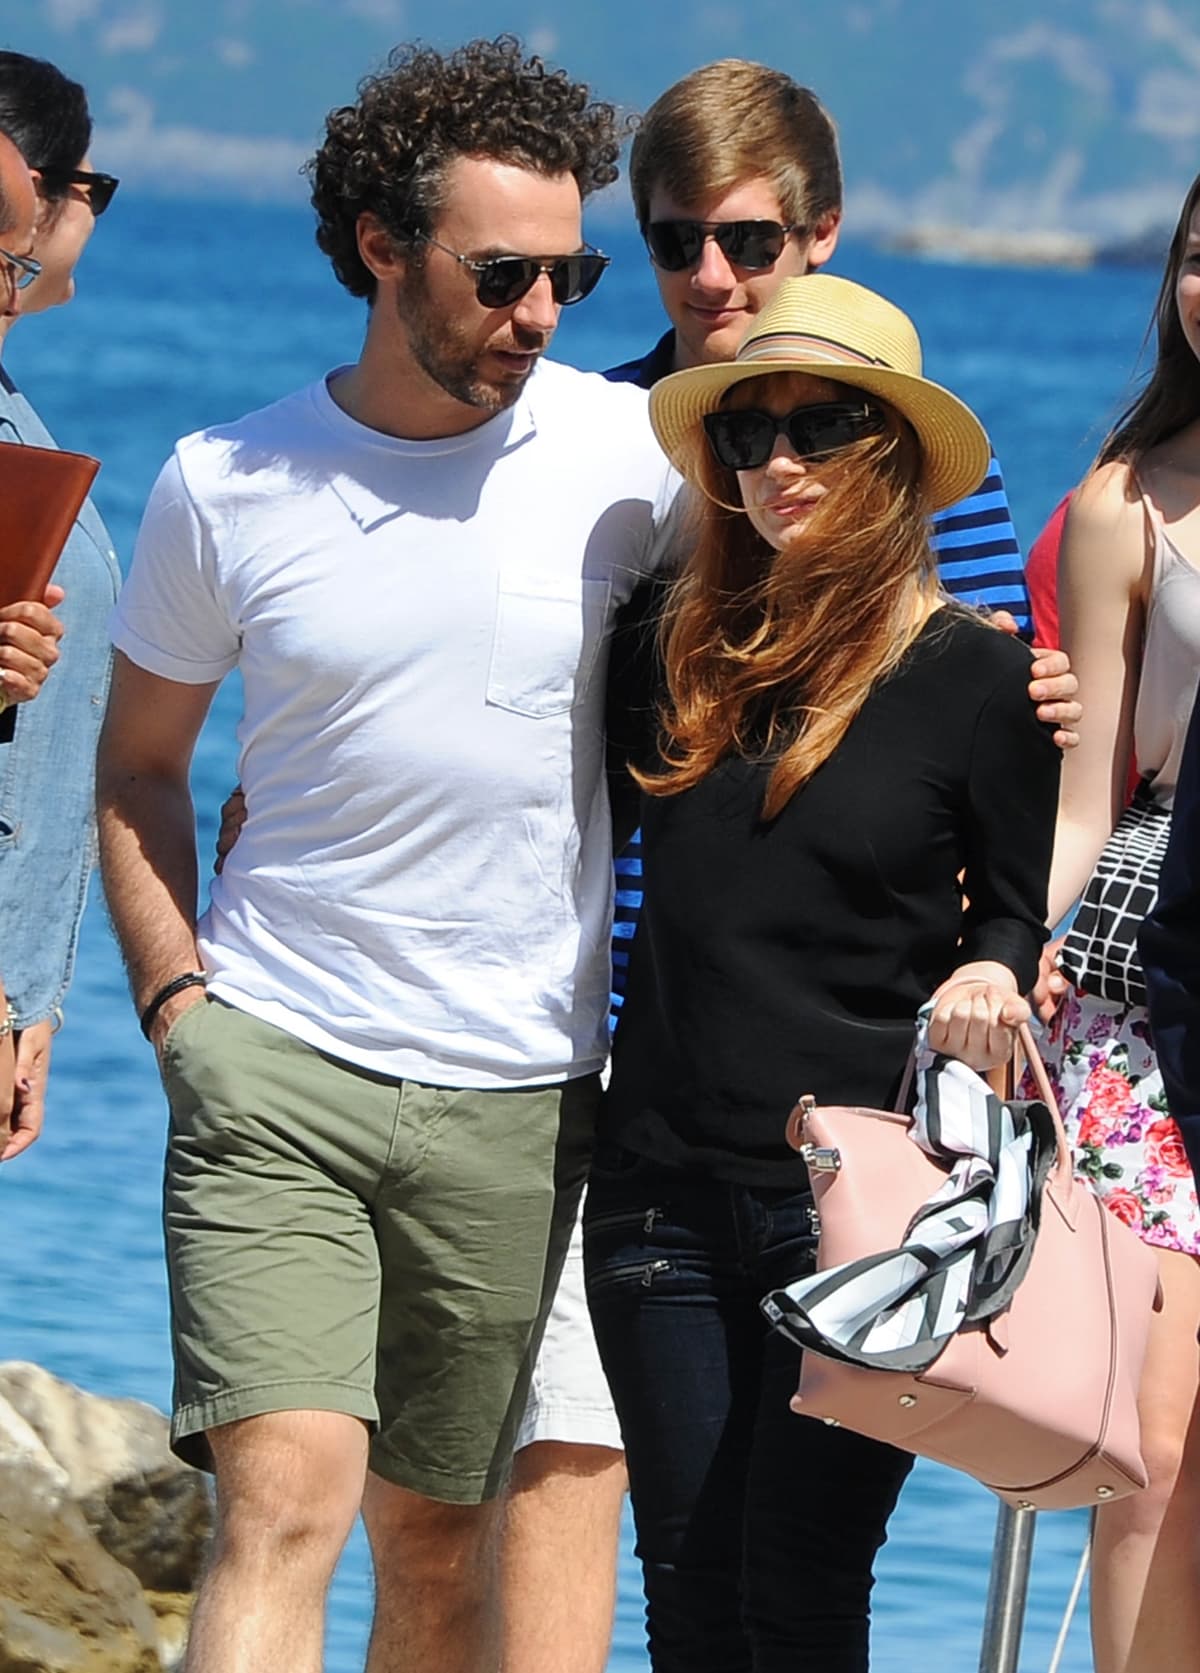 Gian Luca Passi de Preposulo is significantly younger and taller than his wife Jessica Chastain